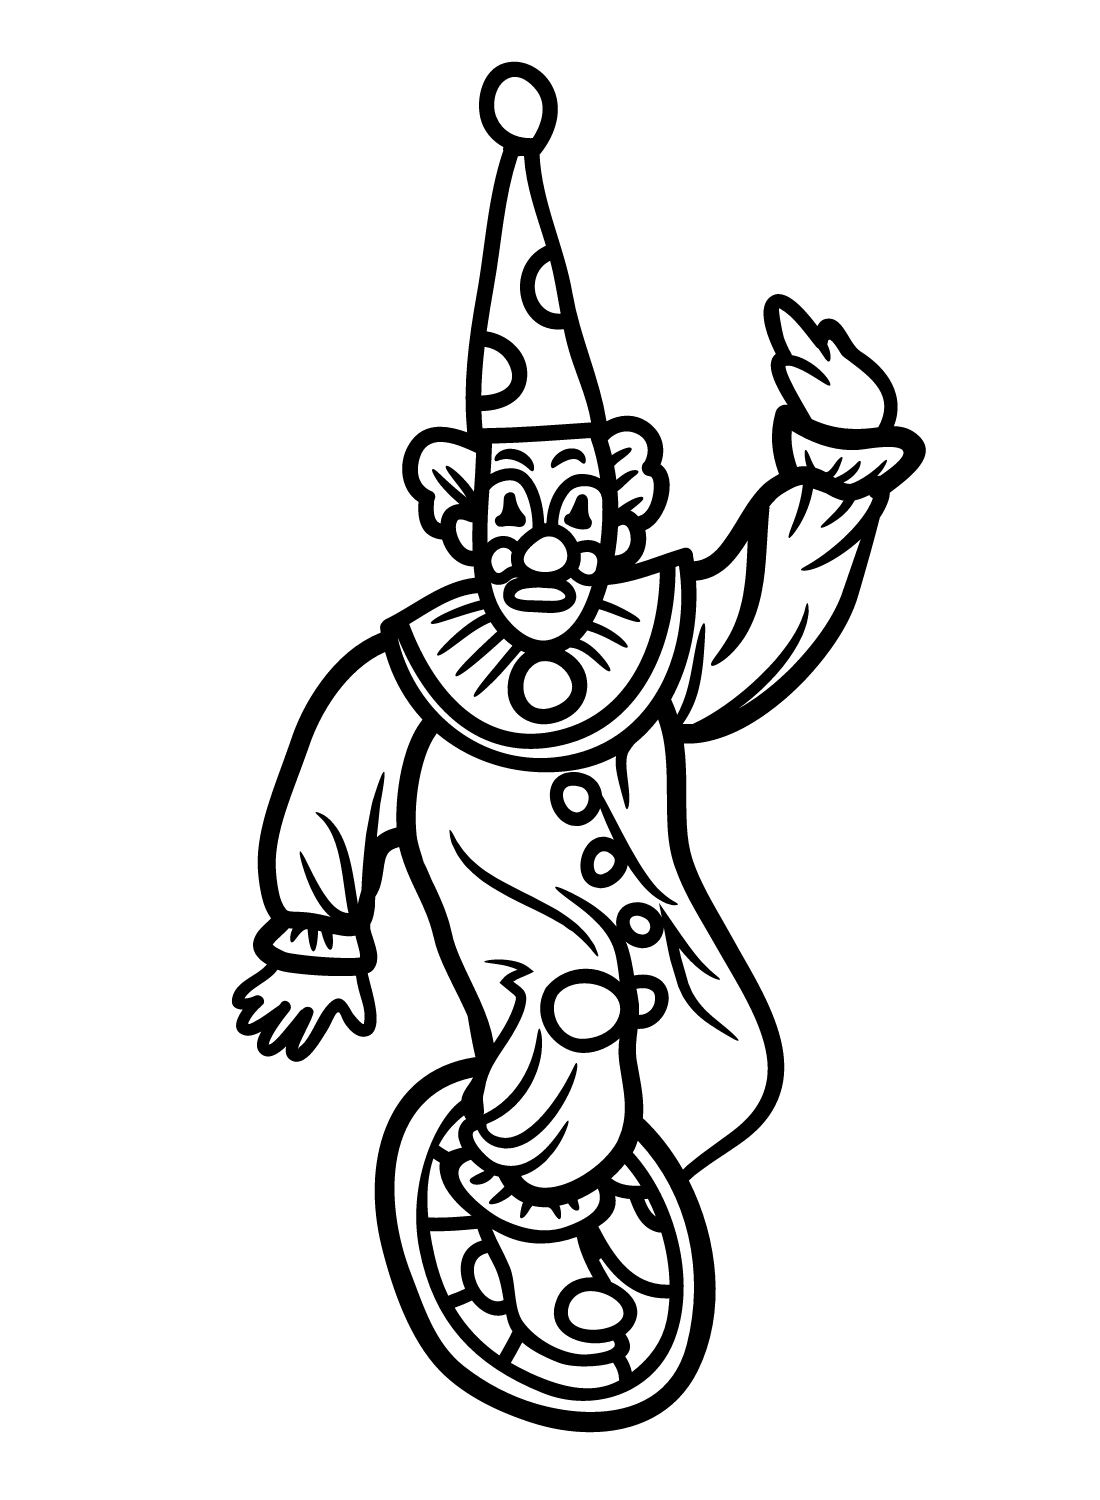 Clown with Unicycle Coloring Page